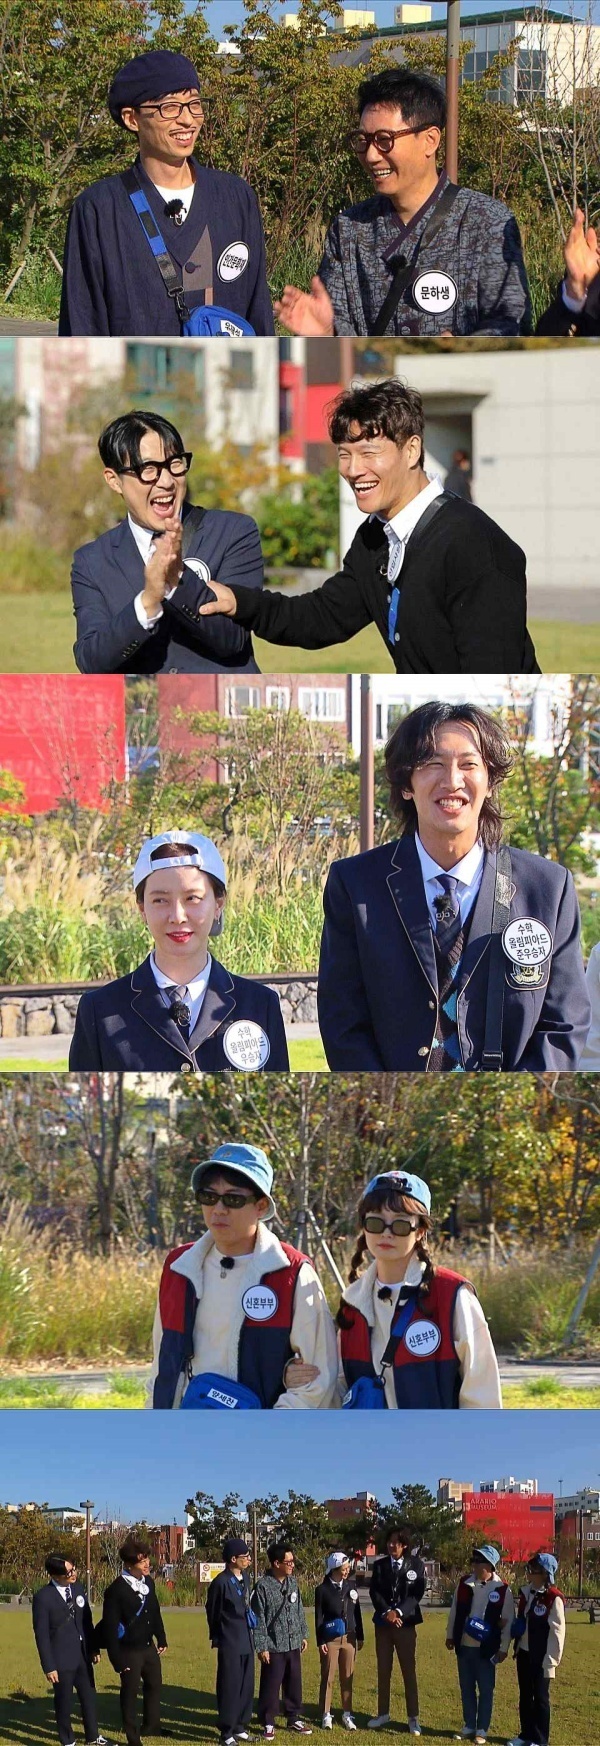 Will the Legend situation drama be born after Chuseok special?On SBS Running Man, which will be broadcast on November 8, the situation drama of Running Man members who left Jeju Island package Travel will be unfolded.Earlier, Running Man made a big headline, including setting a character that broke the mold through the Chuseok special feature Yujinae Heritage War, which was broadcast in October, and climbing to the top of video streaming sites and major portal clip views immediately after the broadcast with the Chemi explosion situation drama.This weeks broadcast predicted the birth of another Legend situation drama with the concept of A variety of 4 couples who left the package Travel to Jeju Island.On this day, the priest Chemie of Human Cultural Yoo Jae-Suk, who is unknown to the identity, and Ji Suk-jin, the priest of the Gubdaggi Moon, Kim Jong-kook, Super Rookie, and Haha, From Chan and Jeon So-min, Mathematics Olympiad winner Song Ji-hyo and jun-winner Lee Kwang-soo, the character with full personality and the chemistry with the partner caught the eye.They enjoyed a great trip to the scenery and sightseeing spots of Jeju Island, touring restaurants, taking pictures of life, but there was a tension in the pleasant Travel when the super-class reversal hidden in the package Travel was revealed.